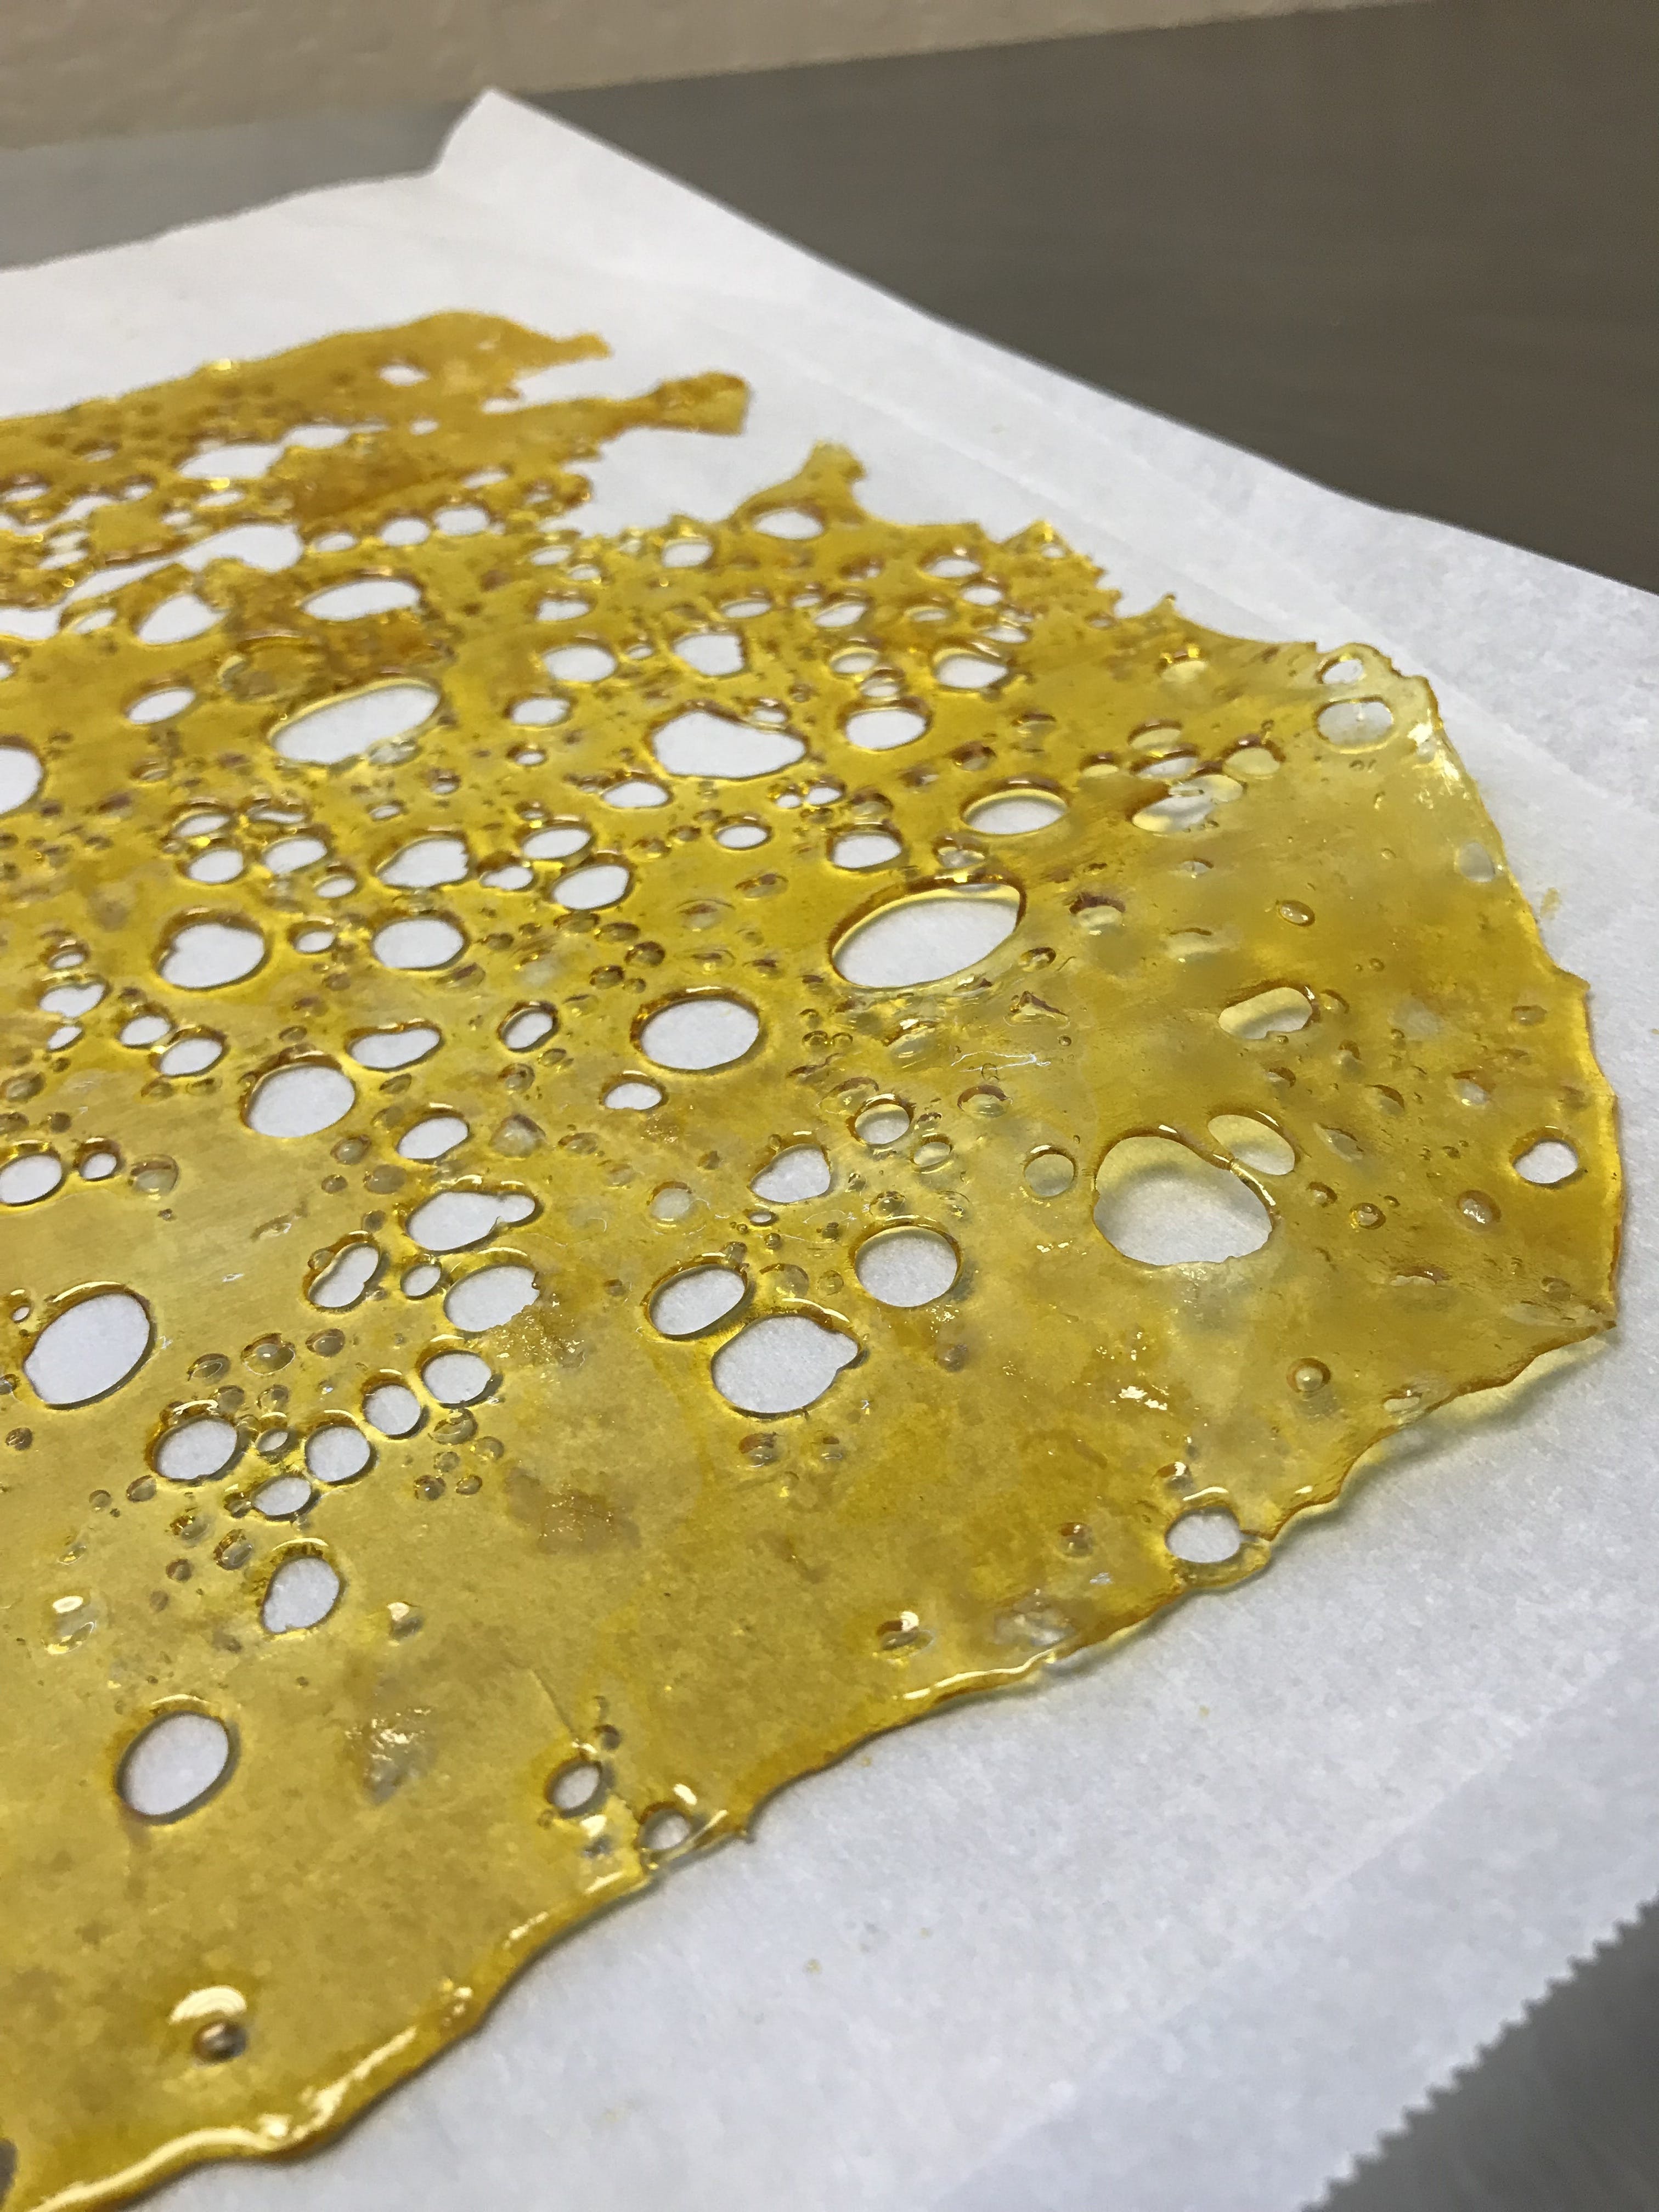 wax-sweet-science-shatter-tier-1-bc-blueberry